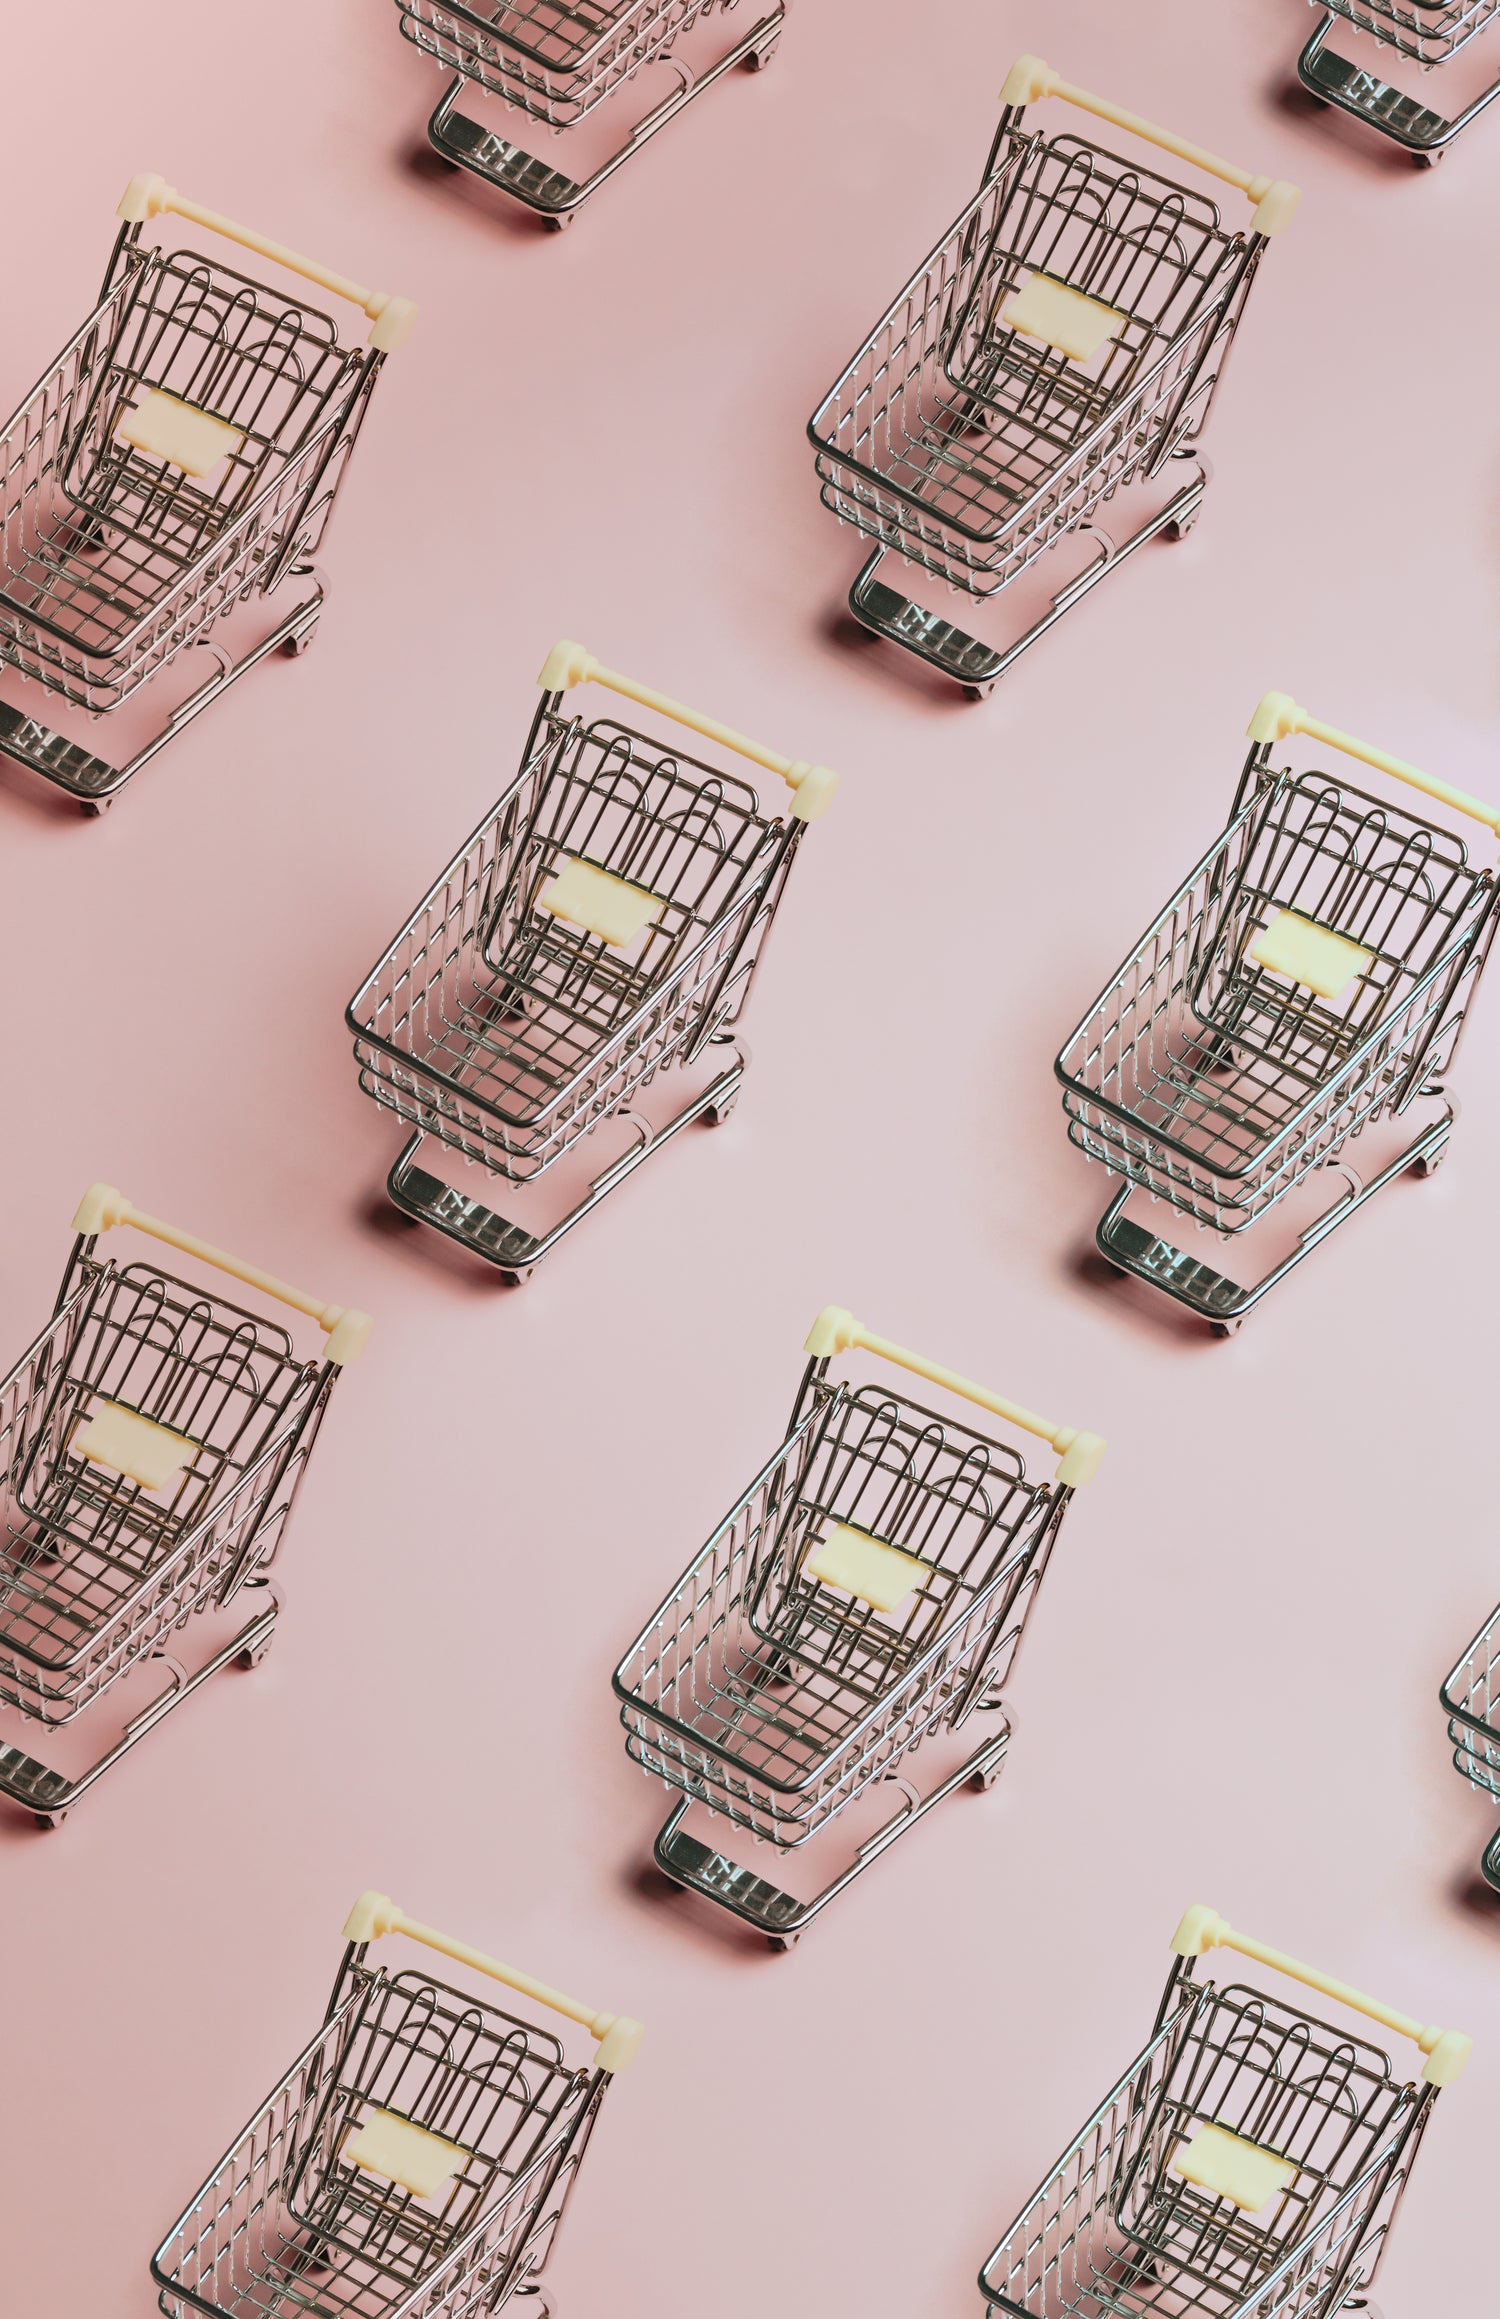 PATTERN-OF-SILVER-SHOPPING-CARTS-ON-A-PINK-BACKGROUND